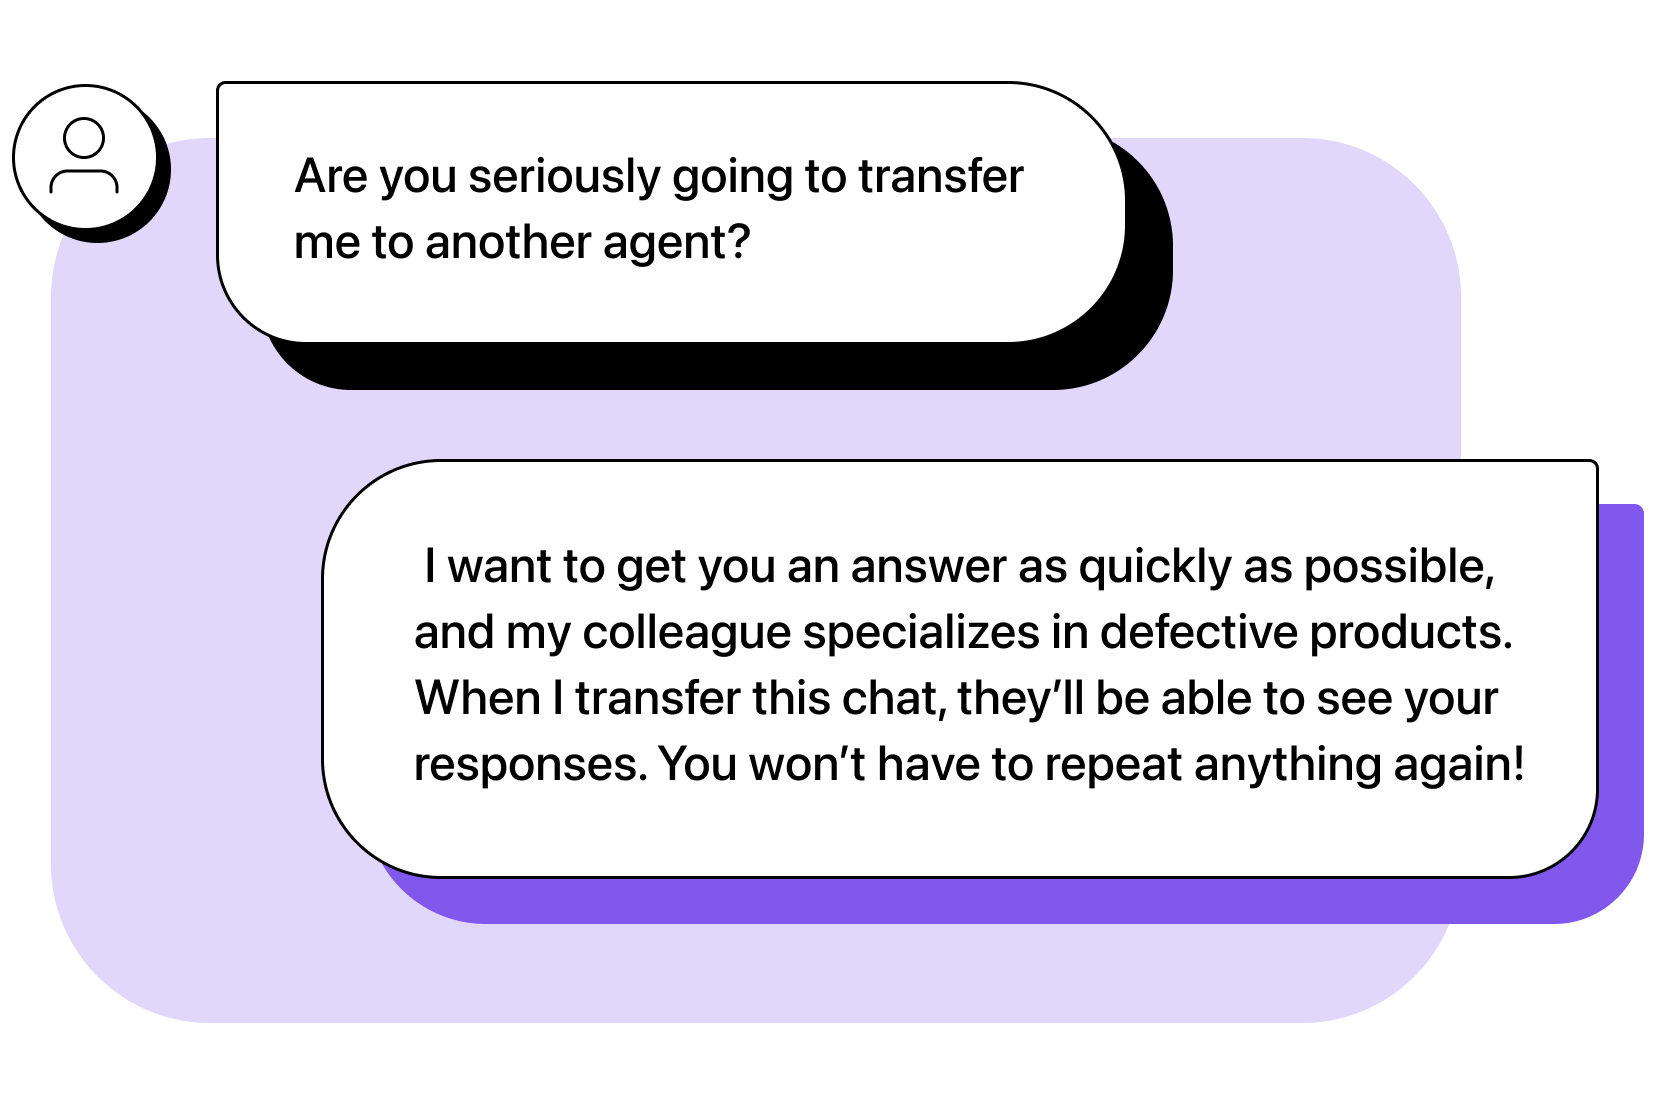 Customer: Are you seriously going to transfer me to another agent? Agent: I want to get you an answer as quickly as possible, and my colleague specializes in defective products. When I transfer this chat, they’ll be able to see your responses. You won’t have to repeat anything again!